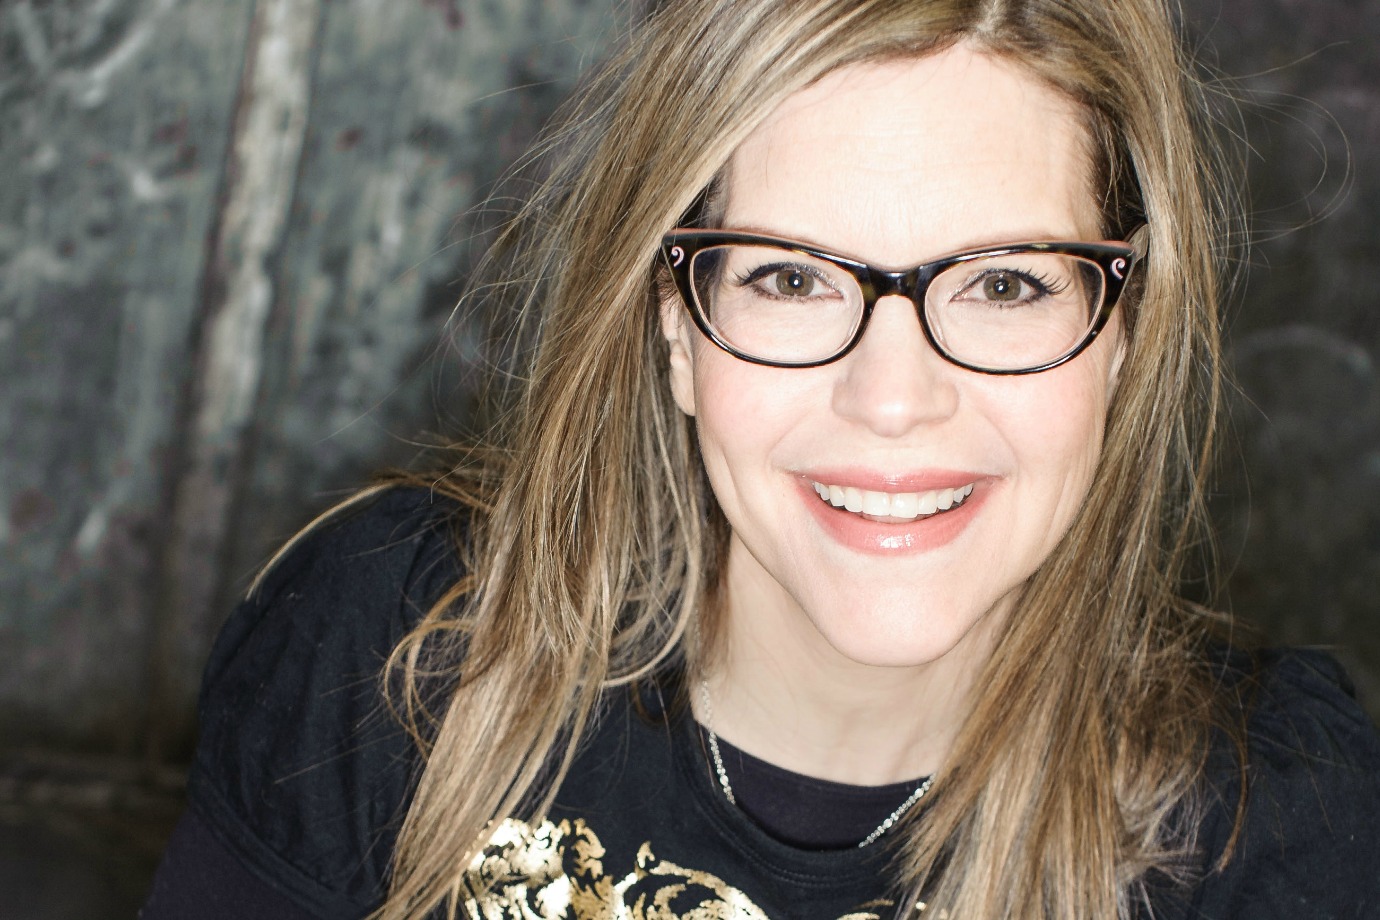 Chatting with Lisa Loeb about why kids music doesn’t actually suck | Spawned ep 51